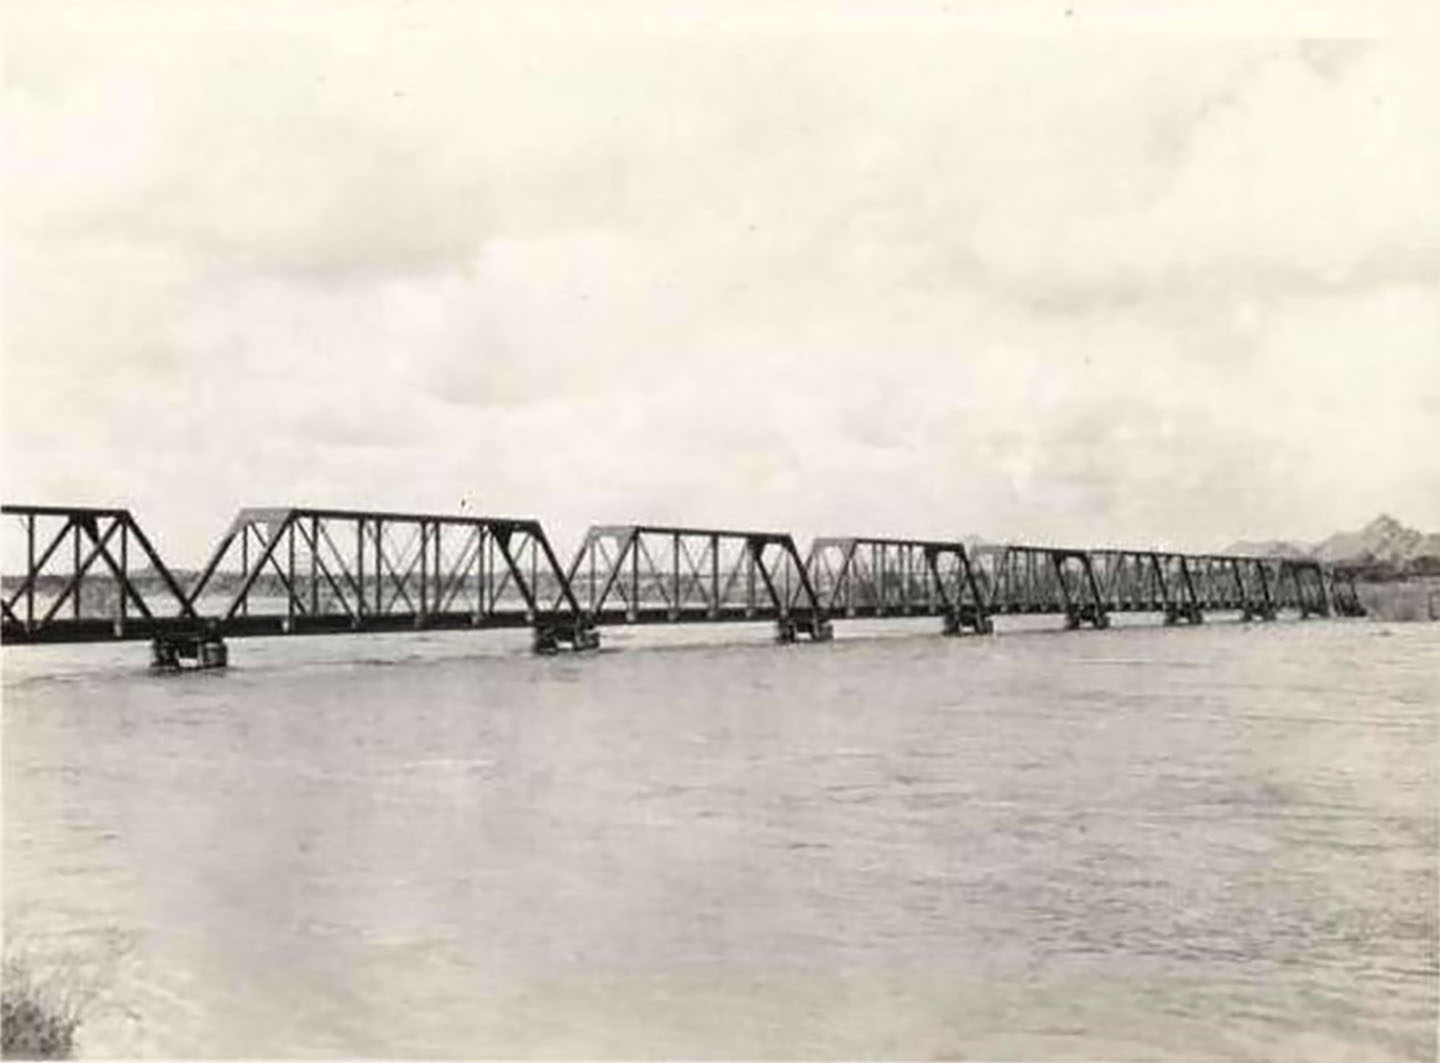 Union Pacific Salt River Bridge in Tempe as completed in 1912